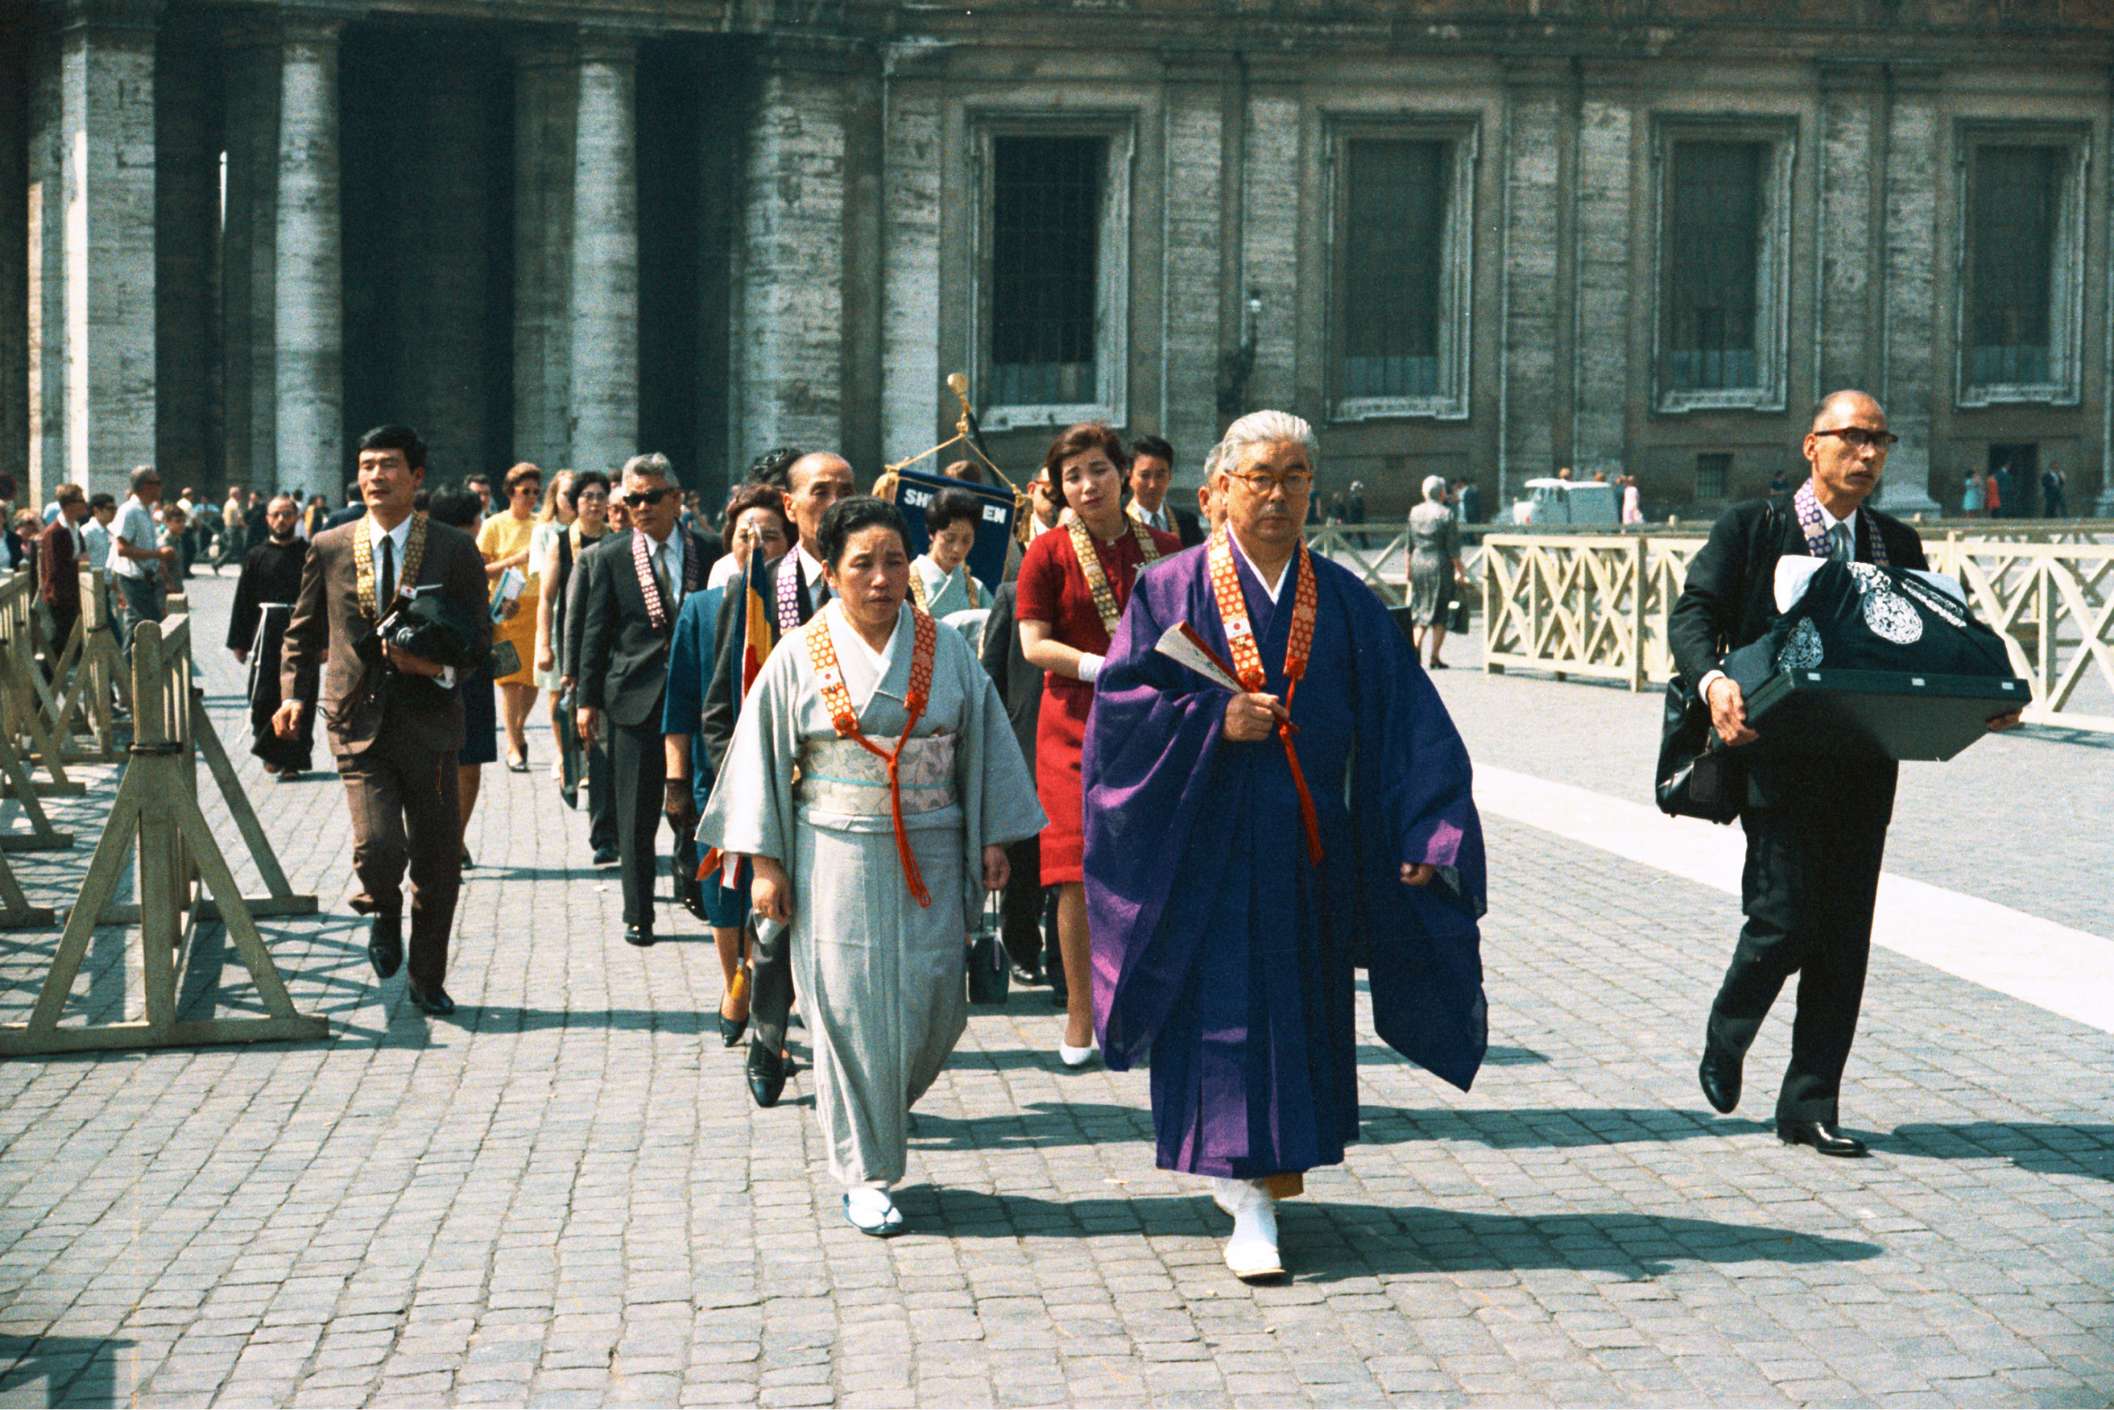 Shinjo in purple robes holding a folding fan and Tomoji in a sky blue kimono lead a procession of formally dressed Japanese people through the stone paved, marble pillared courtyard of the Vatican.